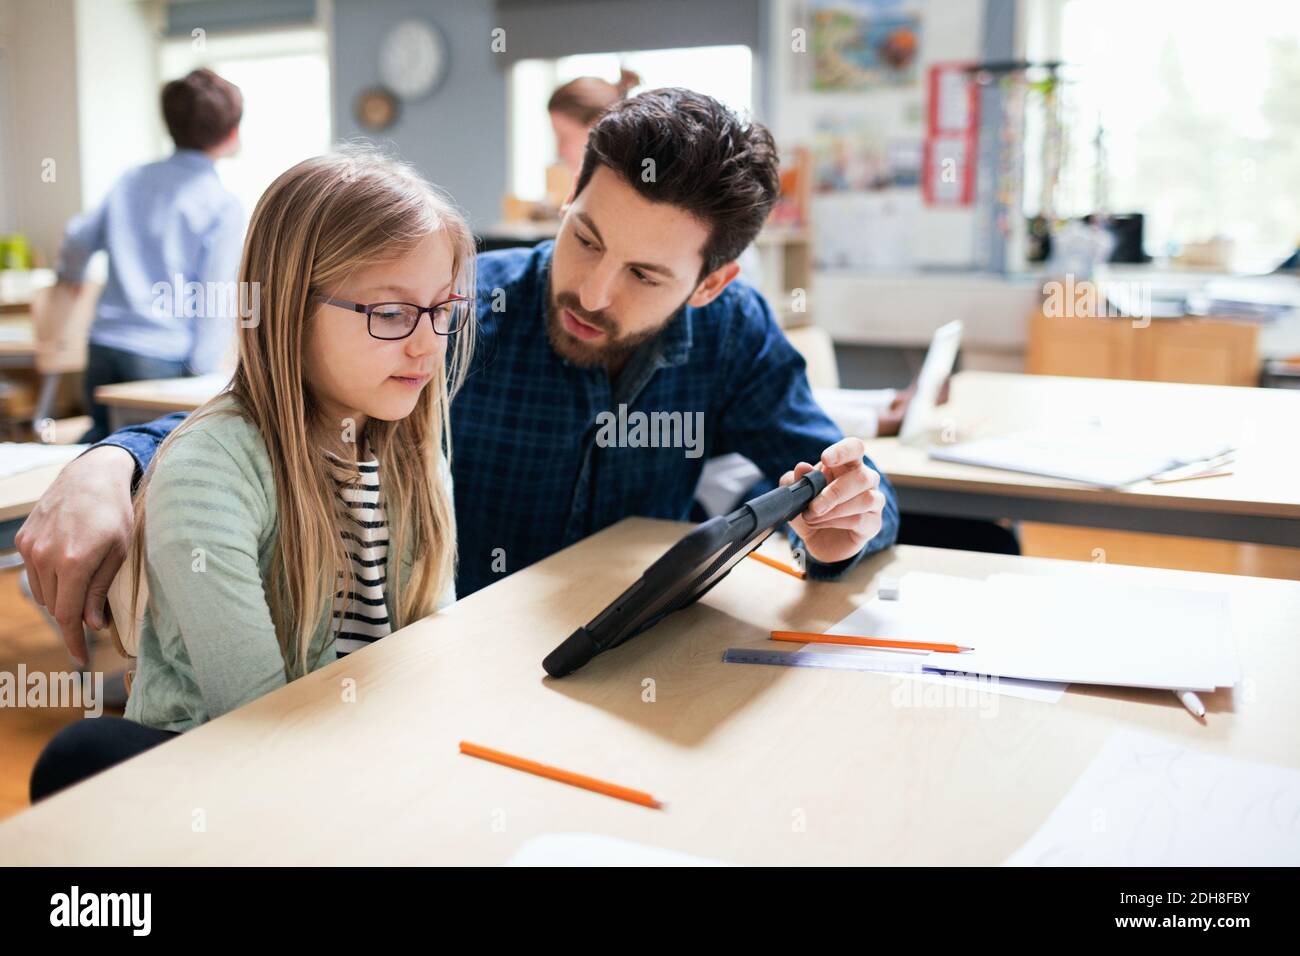 Teacher discussing with student while showing digital tablet at desk in classroom Stock Photo